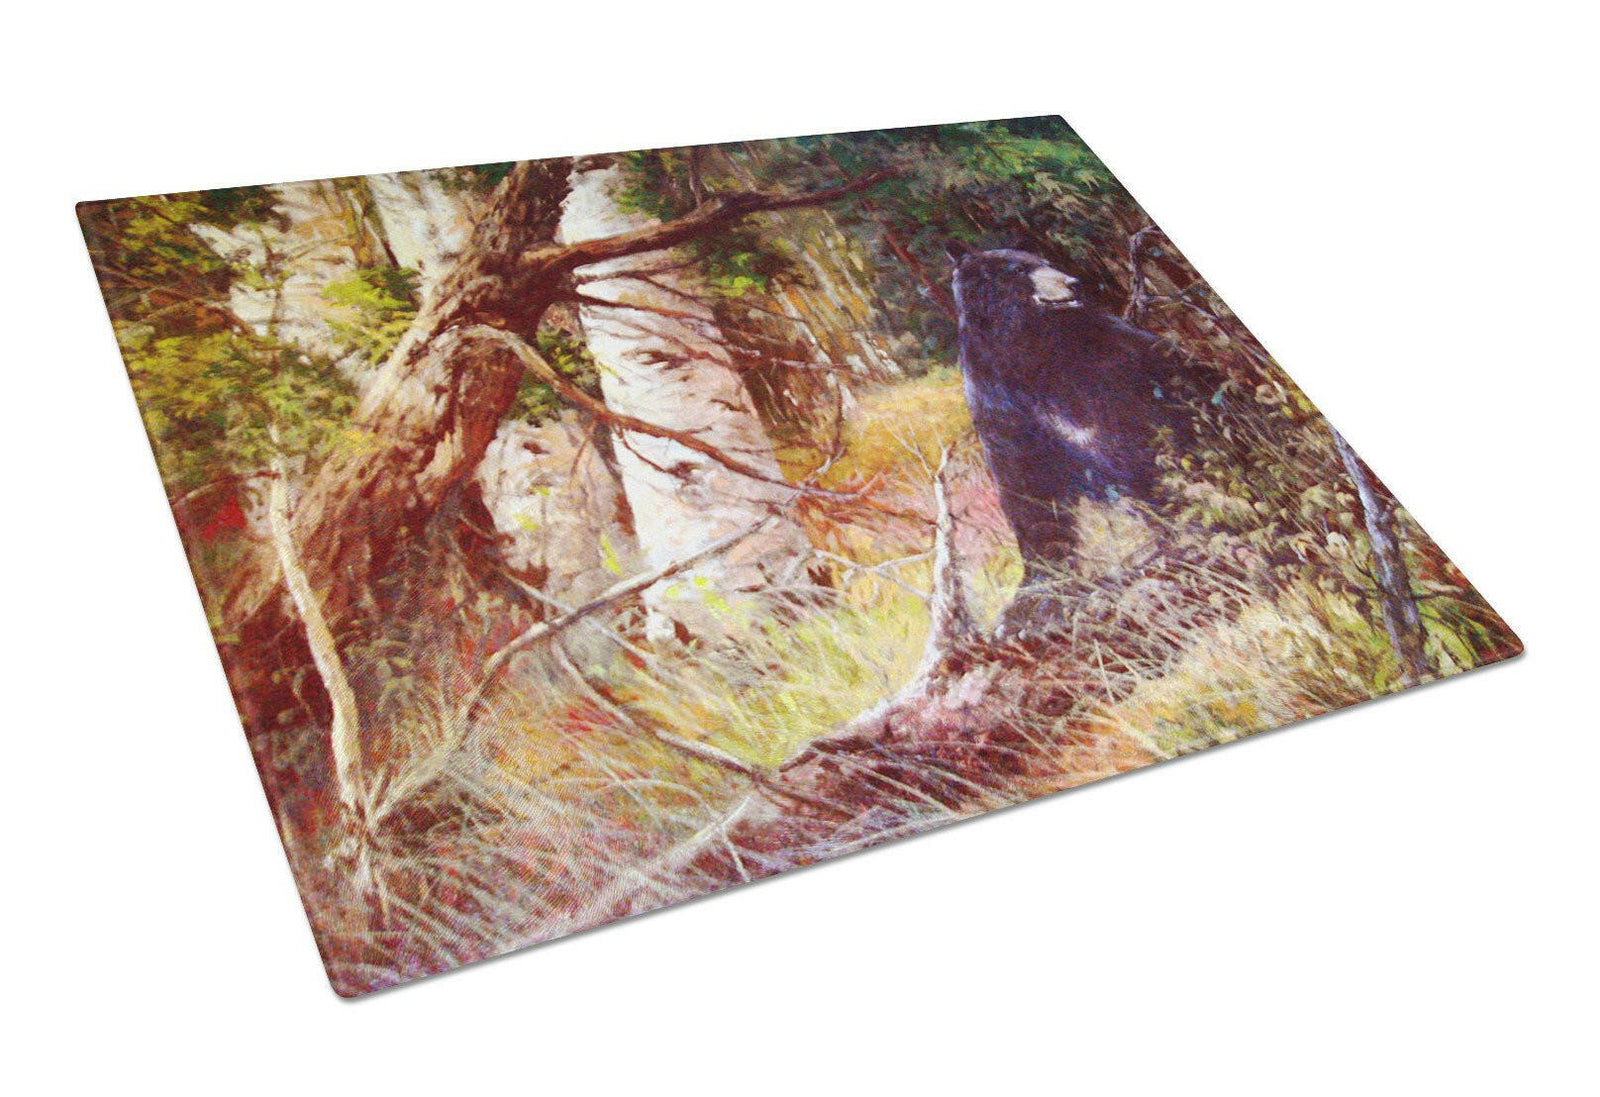 Are you there Mr. Black Bear Glass Cutting Board Large PJC1074LCB by Caroline's Treasures